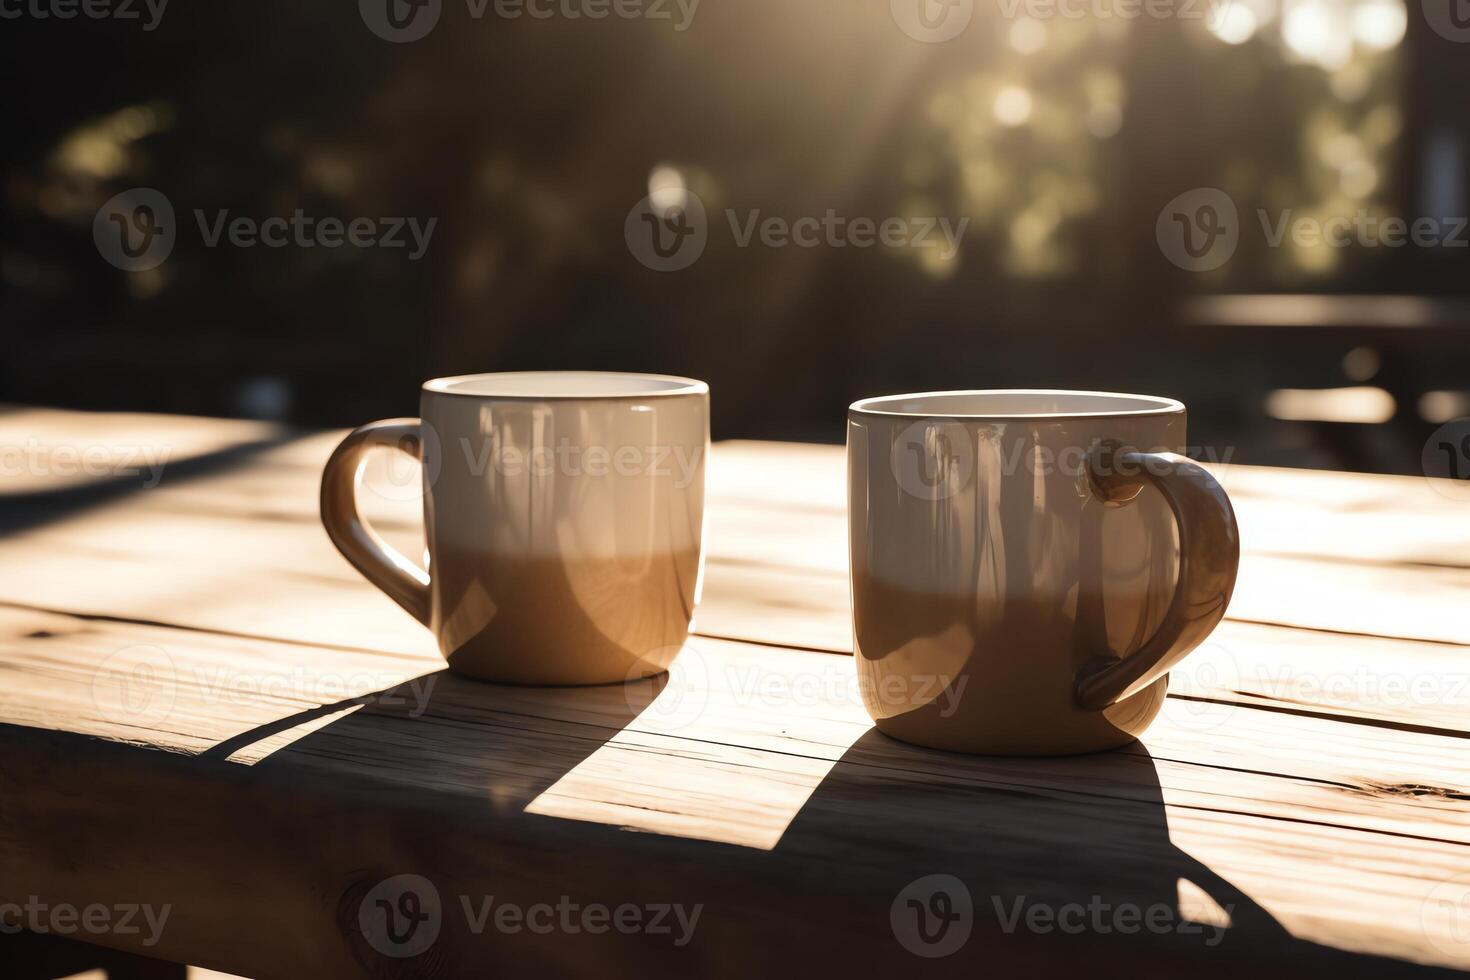 https://static.vecteezy.com/system/resources/previews/023/384/926/non_2x/two-coffee-mugs-sitting-on-a-wooden-table-outside-on-a-sunny-day-with-trees-in-the-backgroup-of-the-picture-and-a-blurry-background-ai-generated-photo.jpg